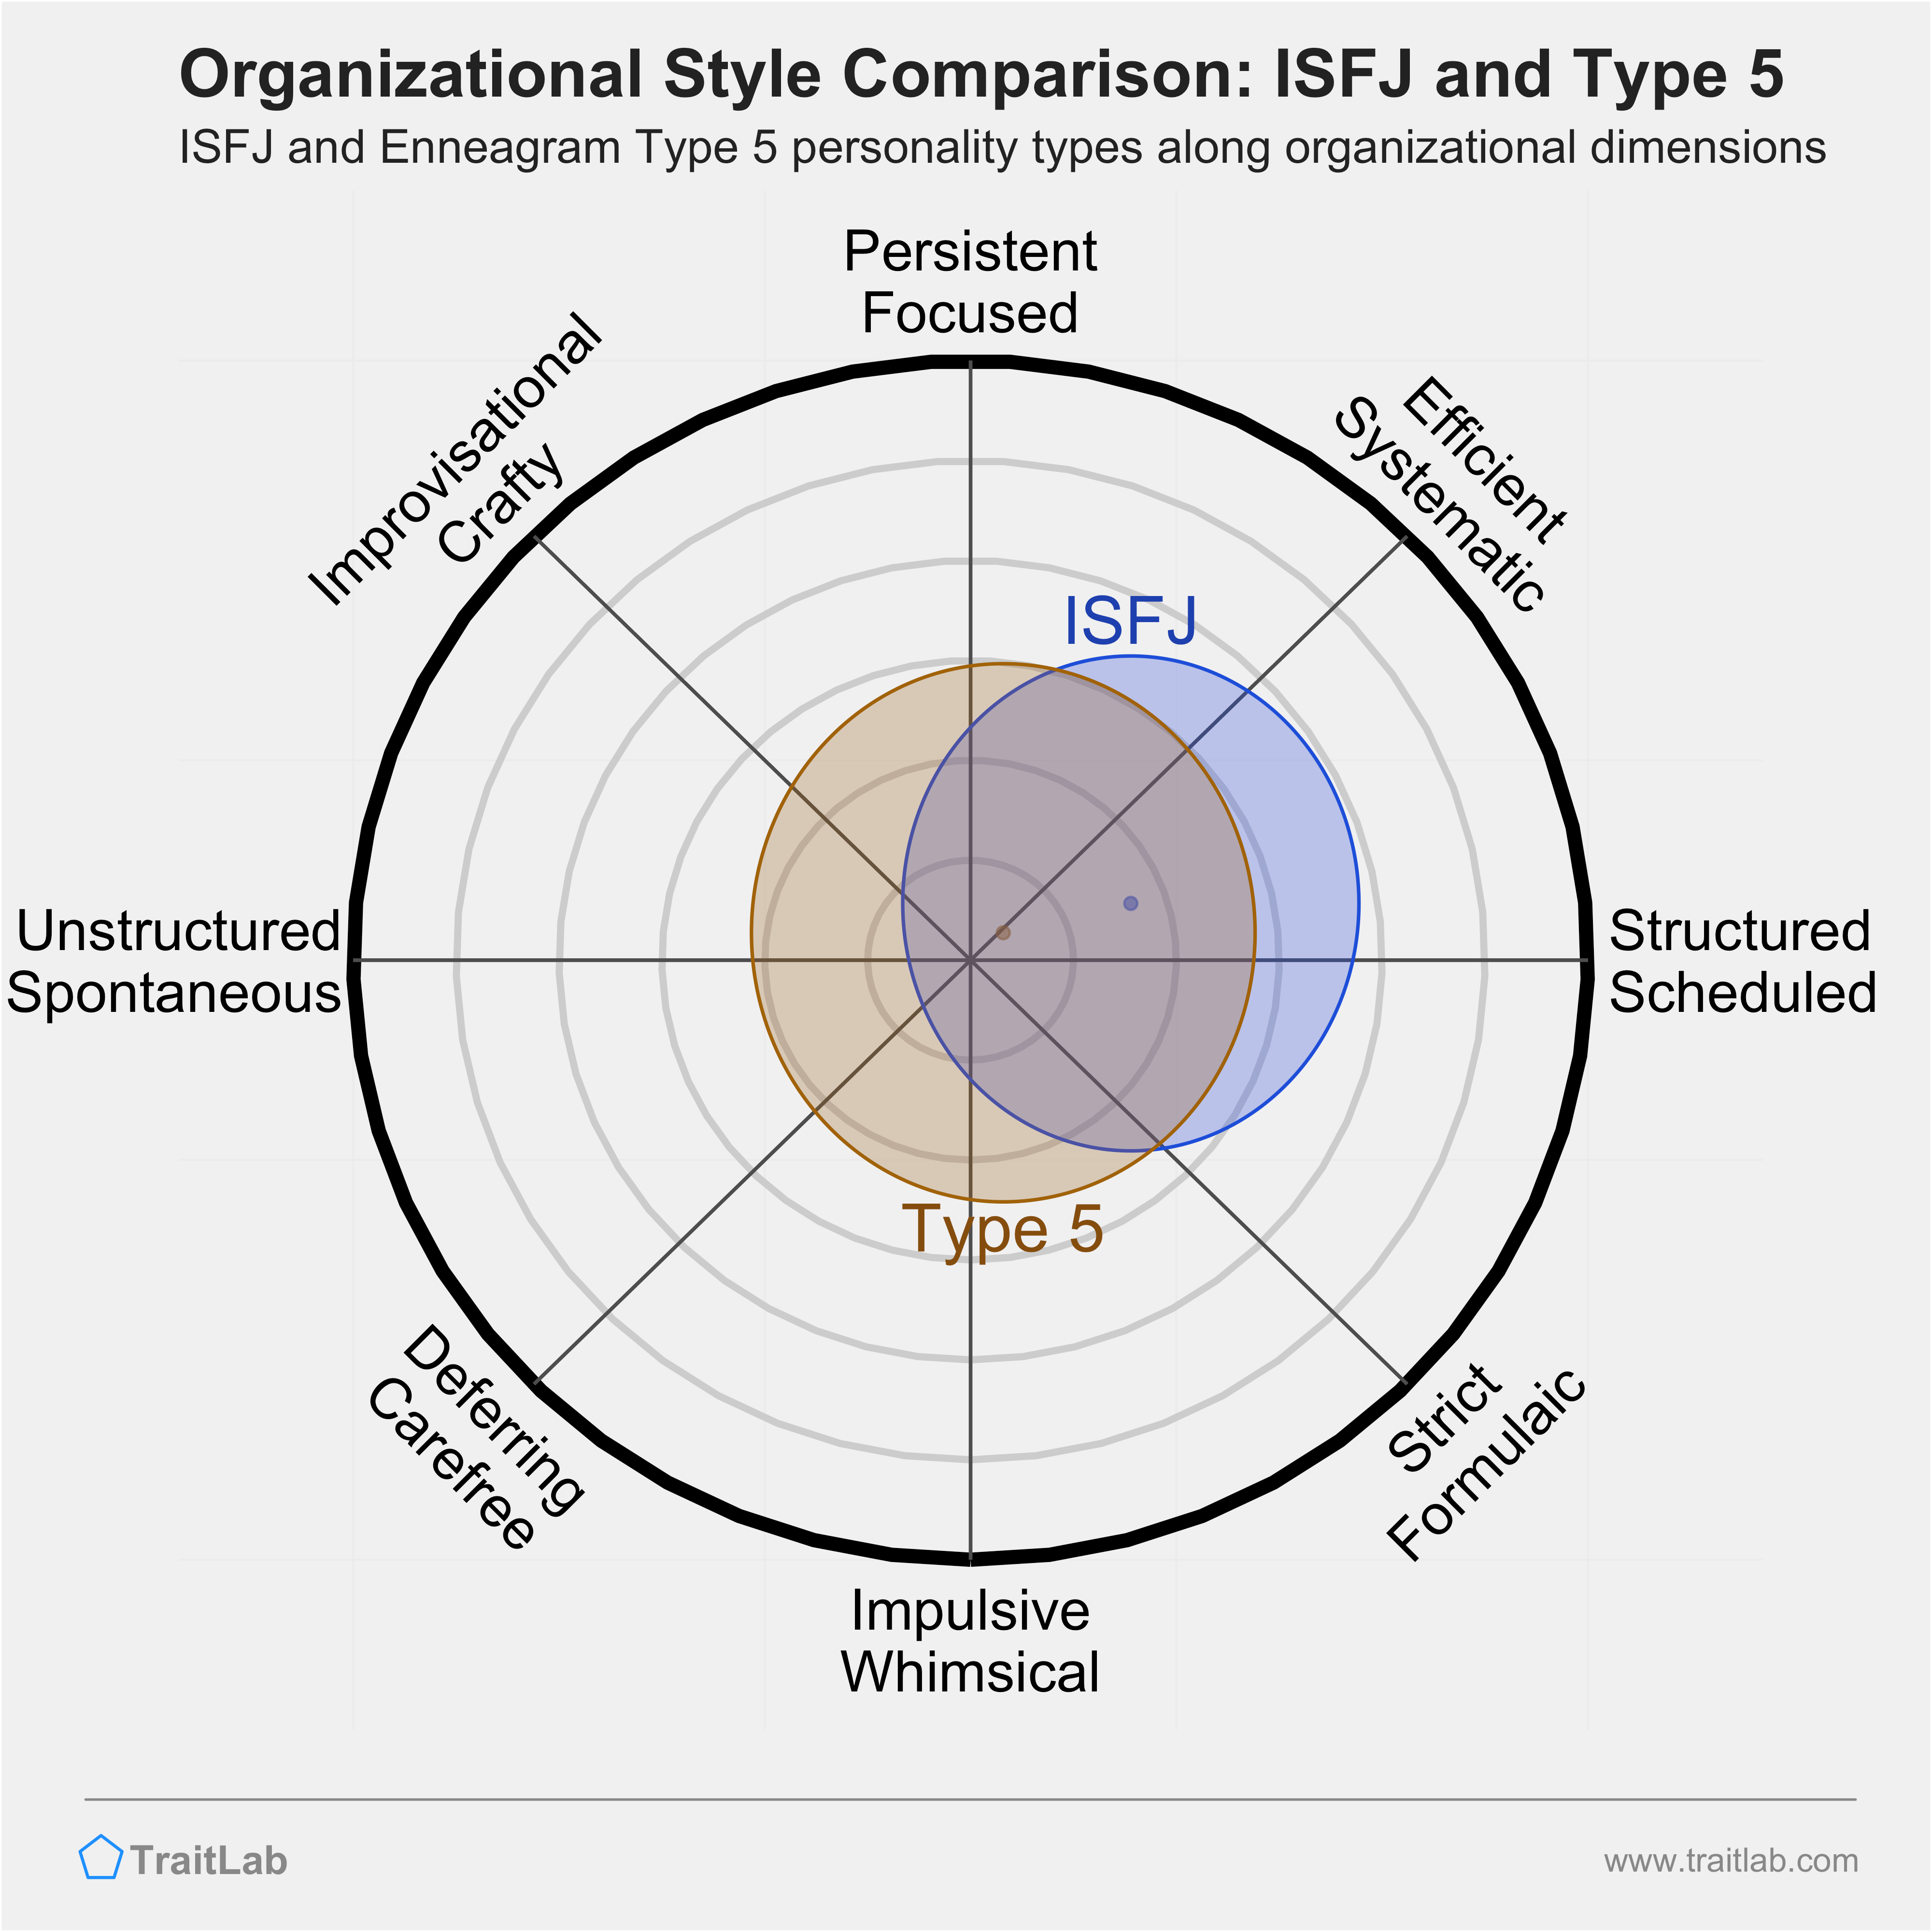 ISFJ and Type 5 comparison across organizational dimensions